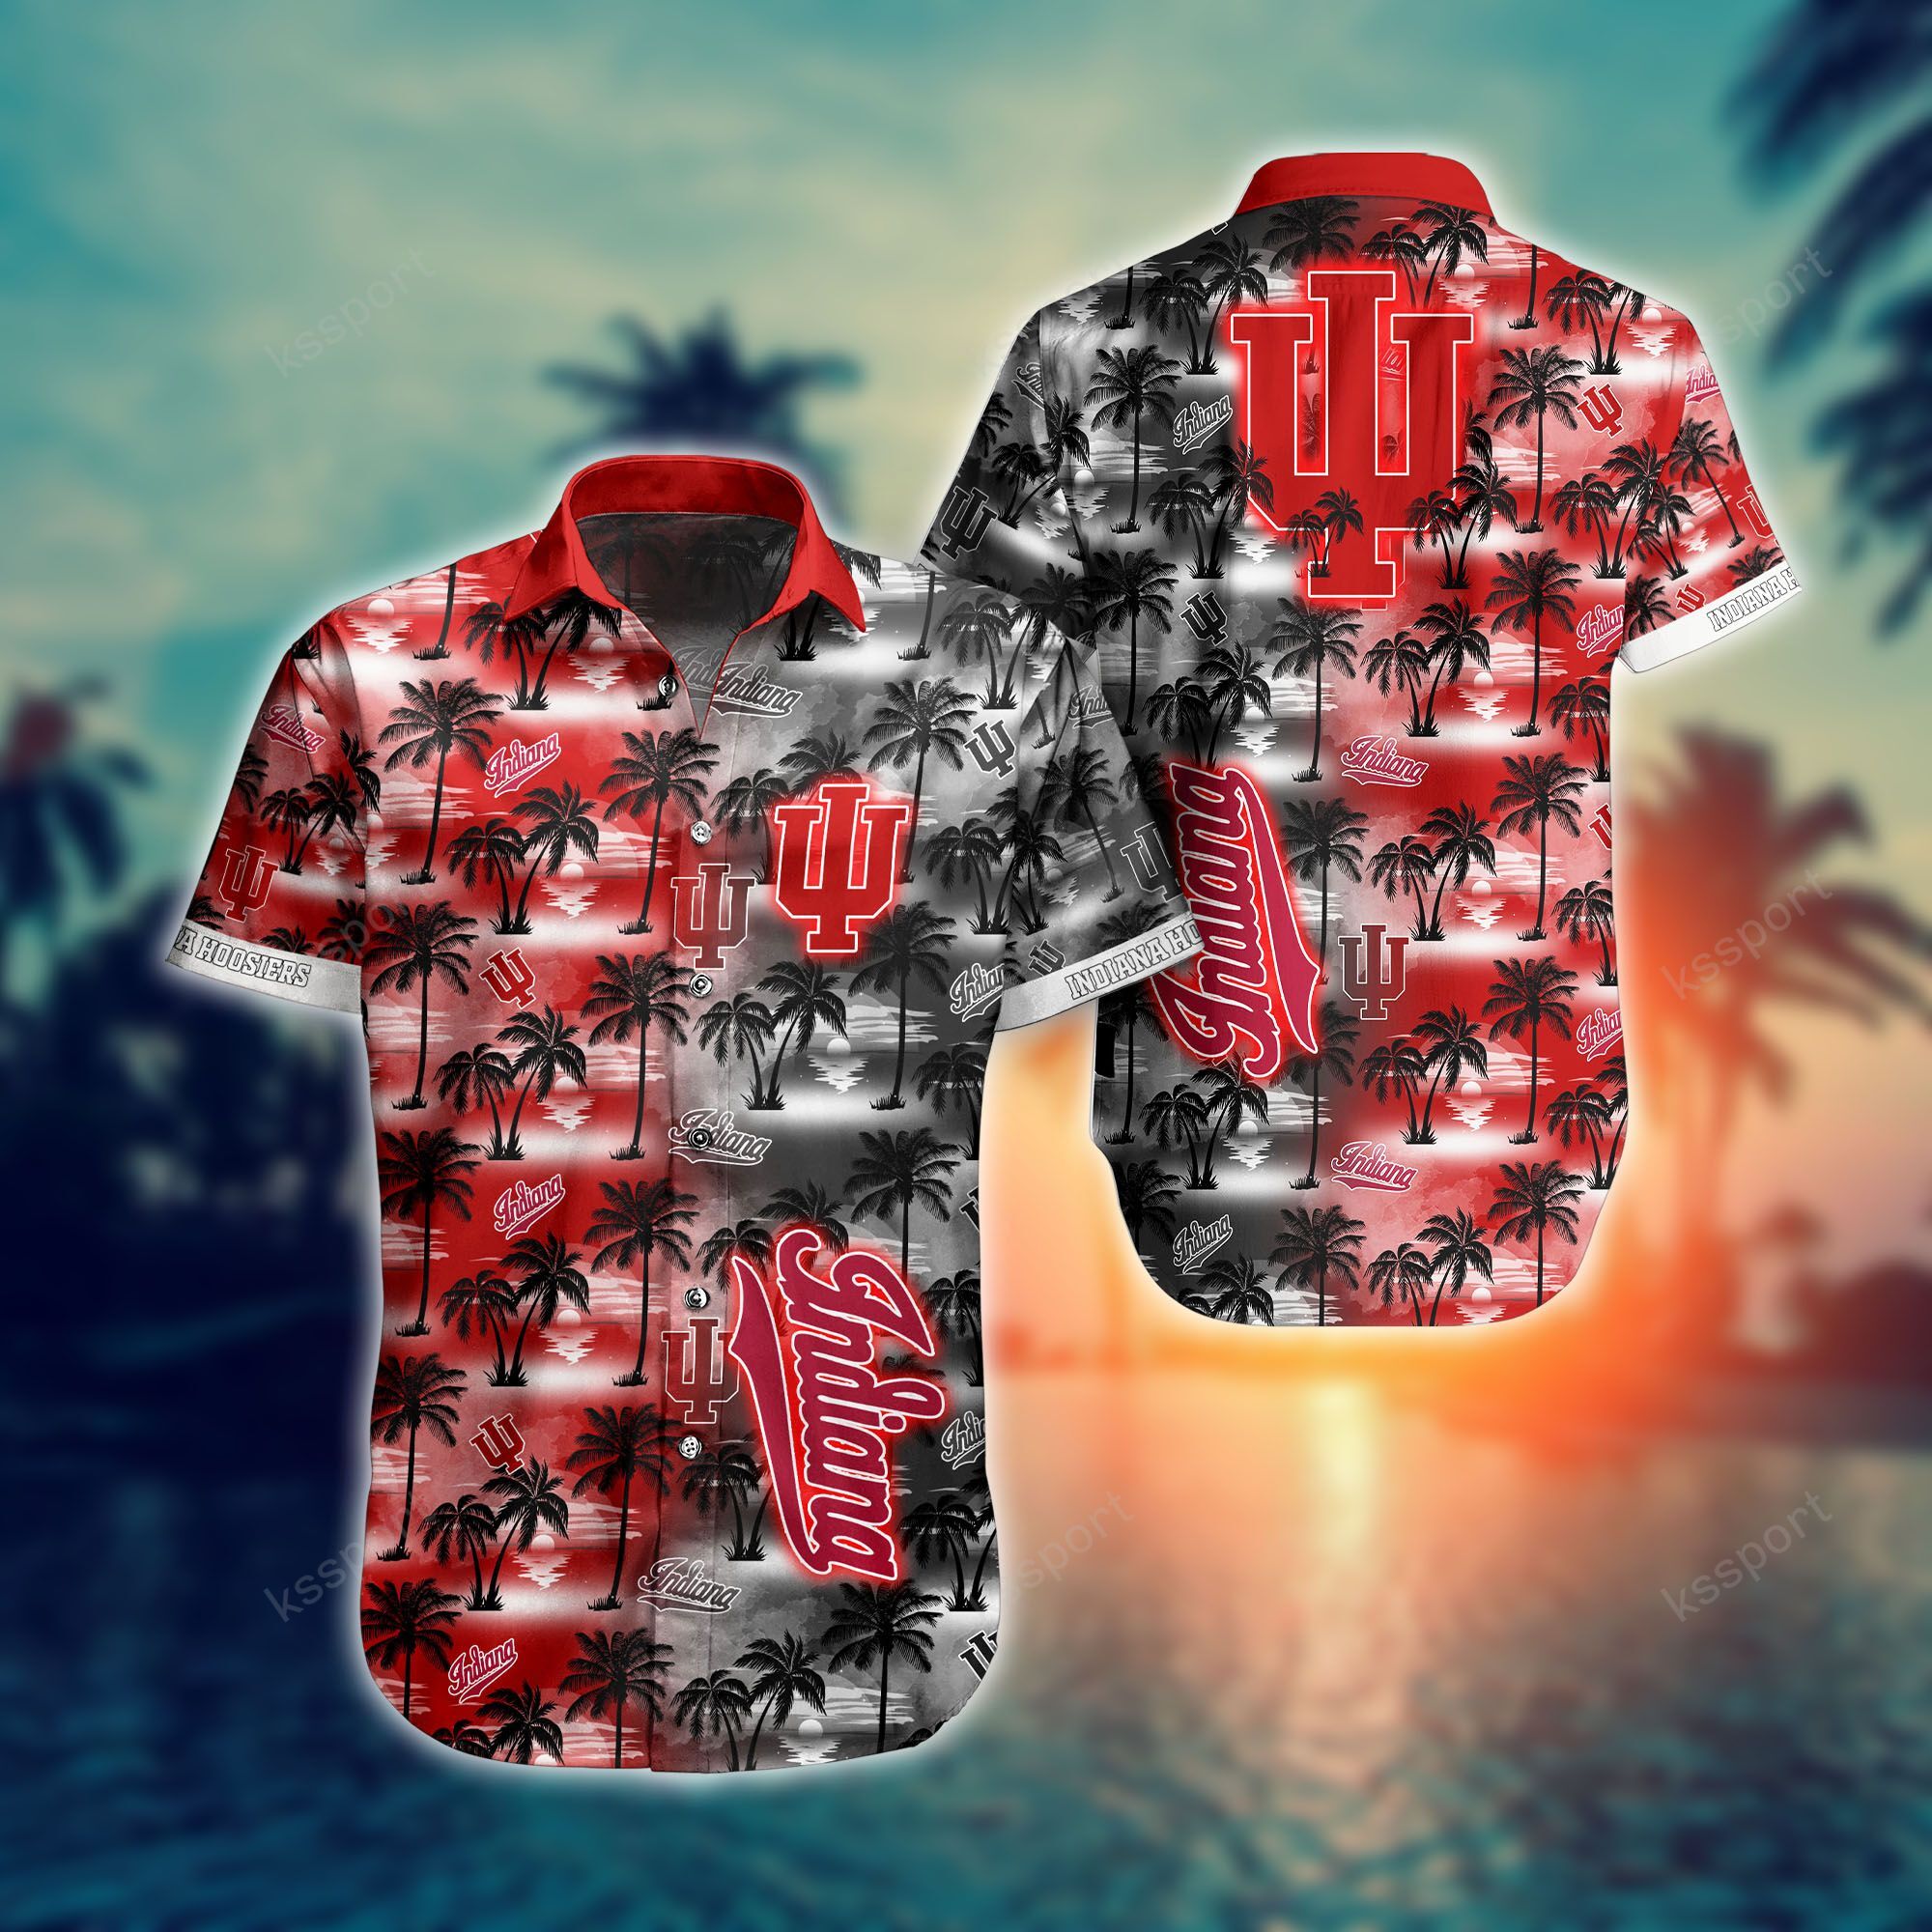 Treat yourself to a cool Hawaiian set today! 26